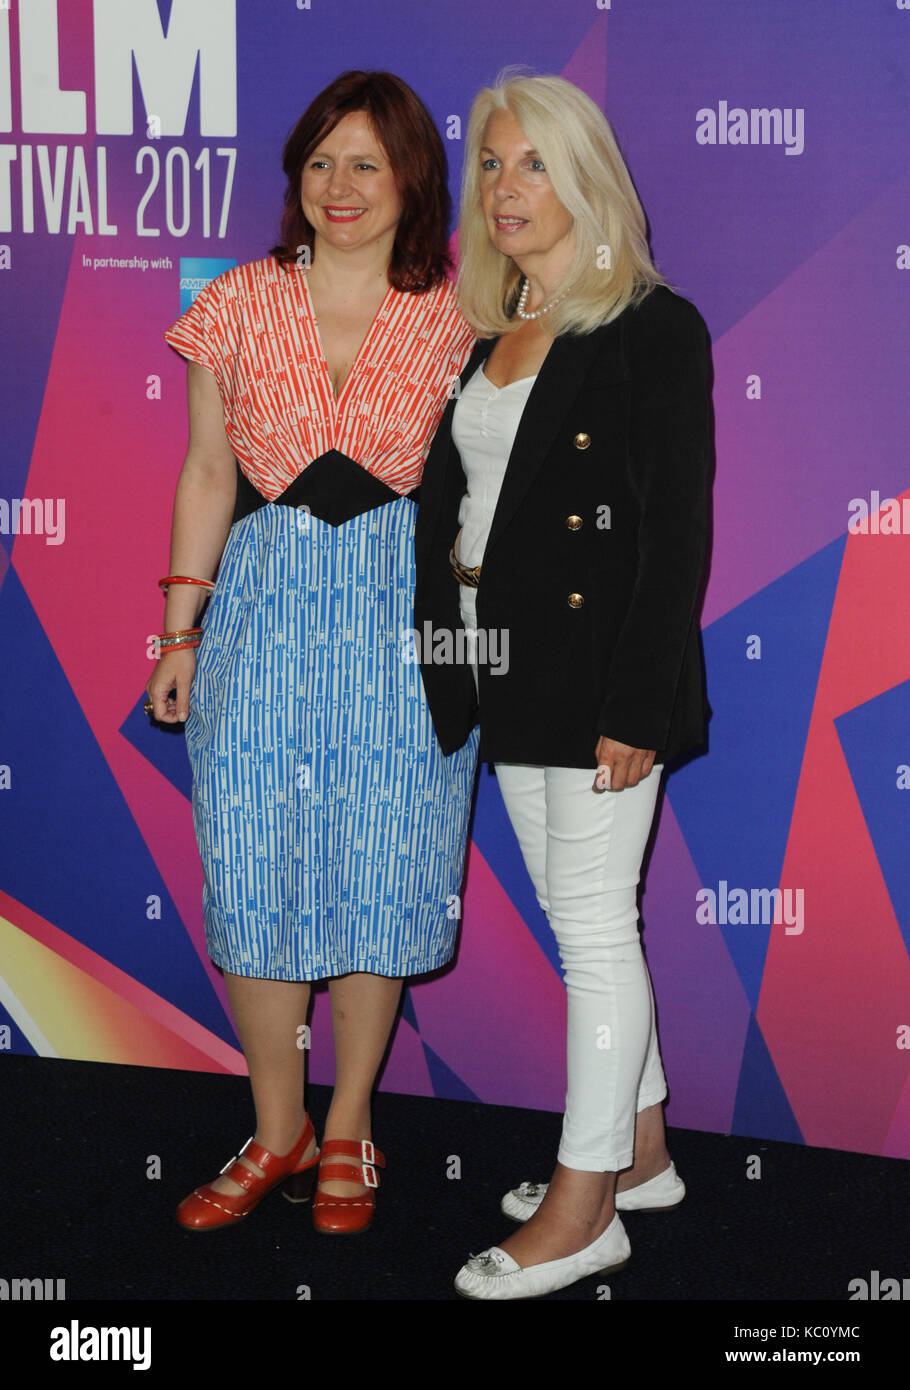 61st BFI London Film Festival 2017 Launch Photocall at Odeon Leicester Square  Featuring: Clare Stewart, Amanda Nevell Where: London, United Kingdom When: 31 Aug 2017 Credit: WENN.com Stock Photo